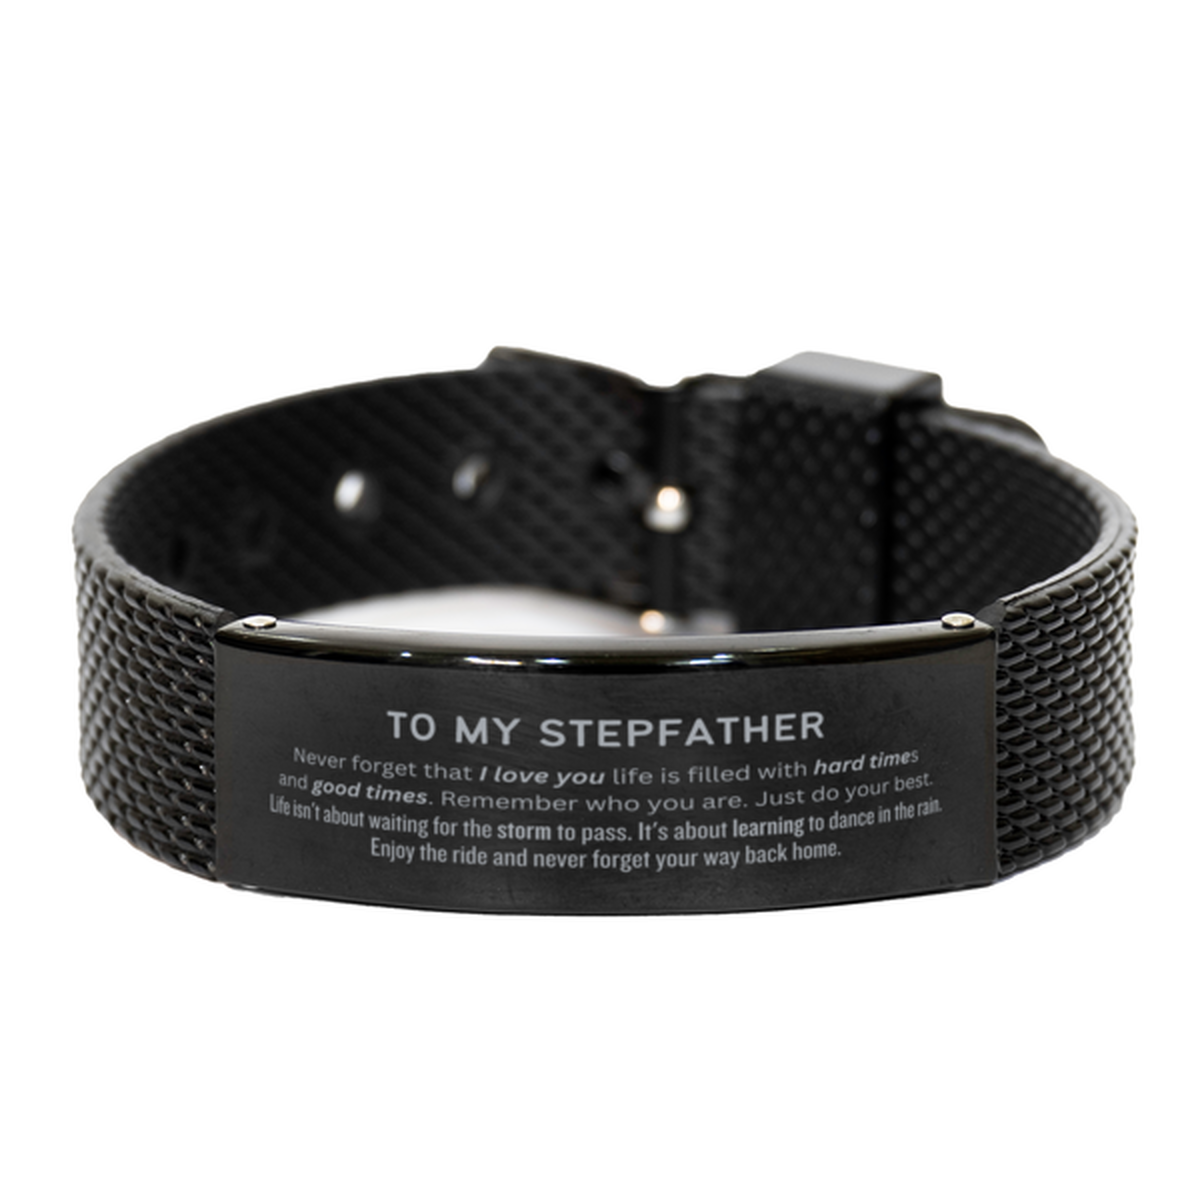 Christmas Stepfather Black Shark Mesh Bracelet Gifts, To My Stepfather Birthday Thank You Gifts For Stepfather, Graduation Unique Gifts For Stepfather To My Stepfather Never forget that I love you life is filled with hard times and good times. Remember wh